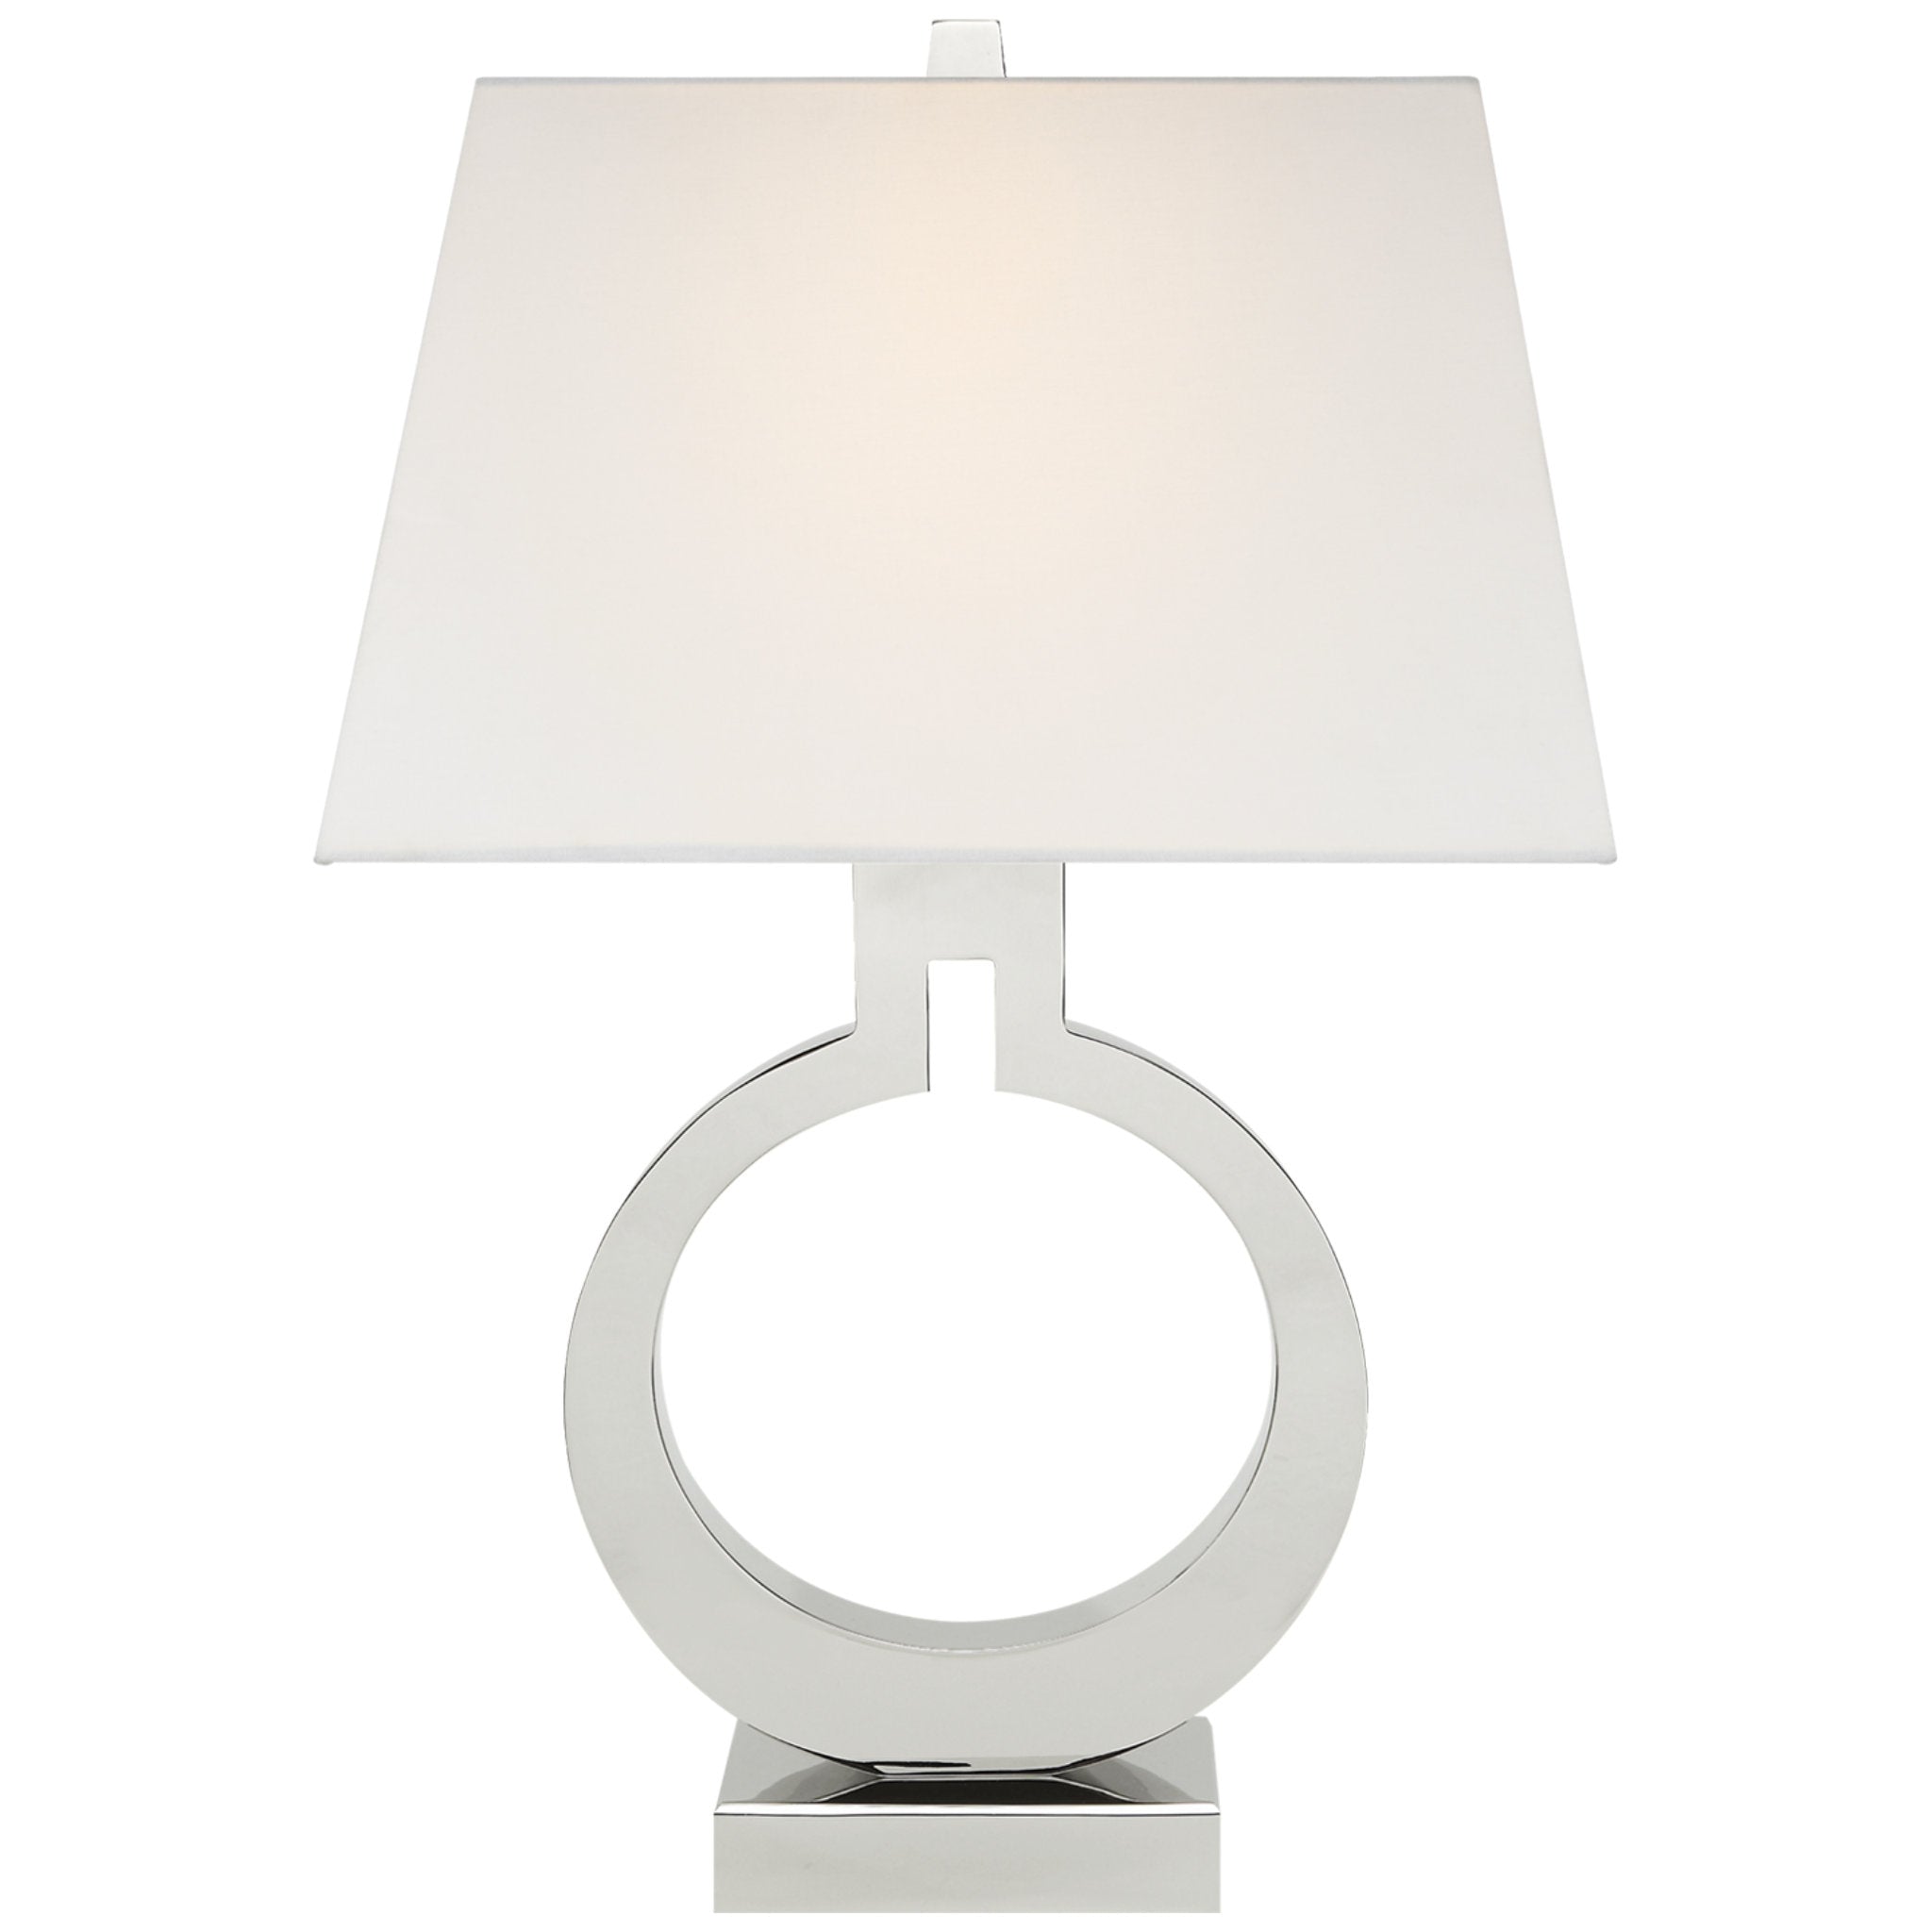 Chapman & Myers Ring Form Small Table Lamp in Polished Nickel with Linen Shade